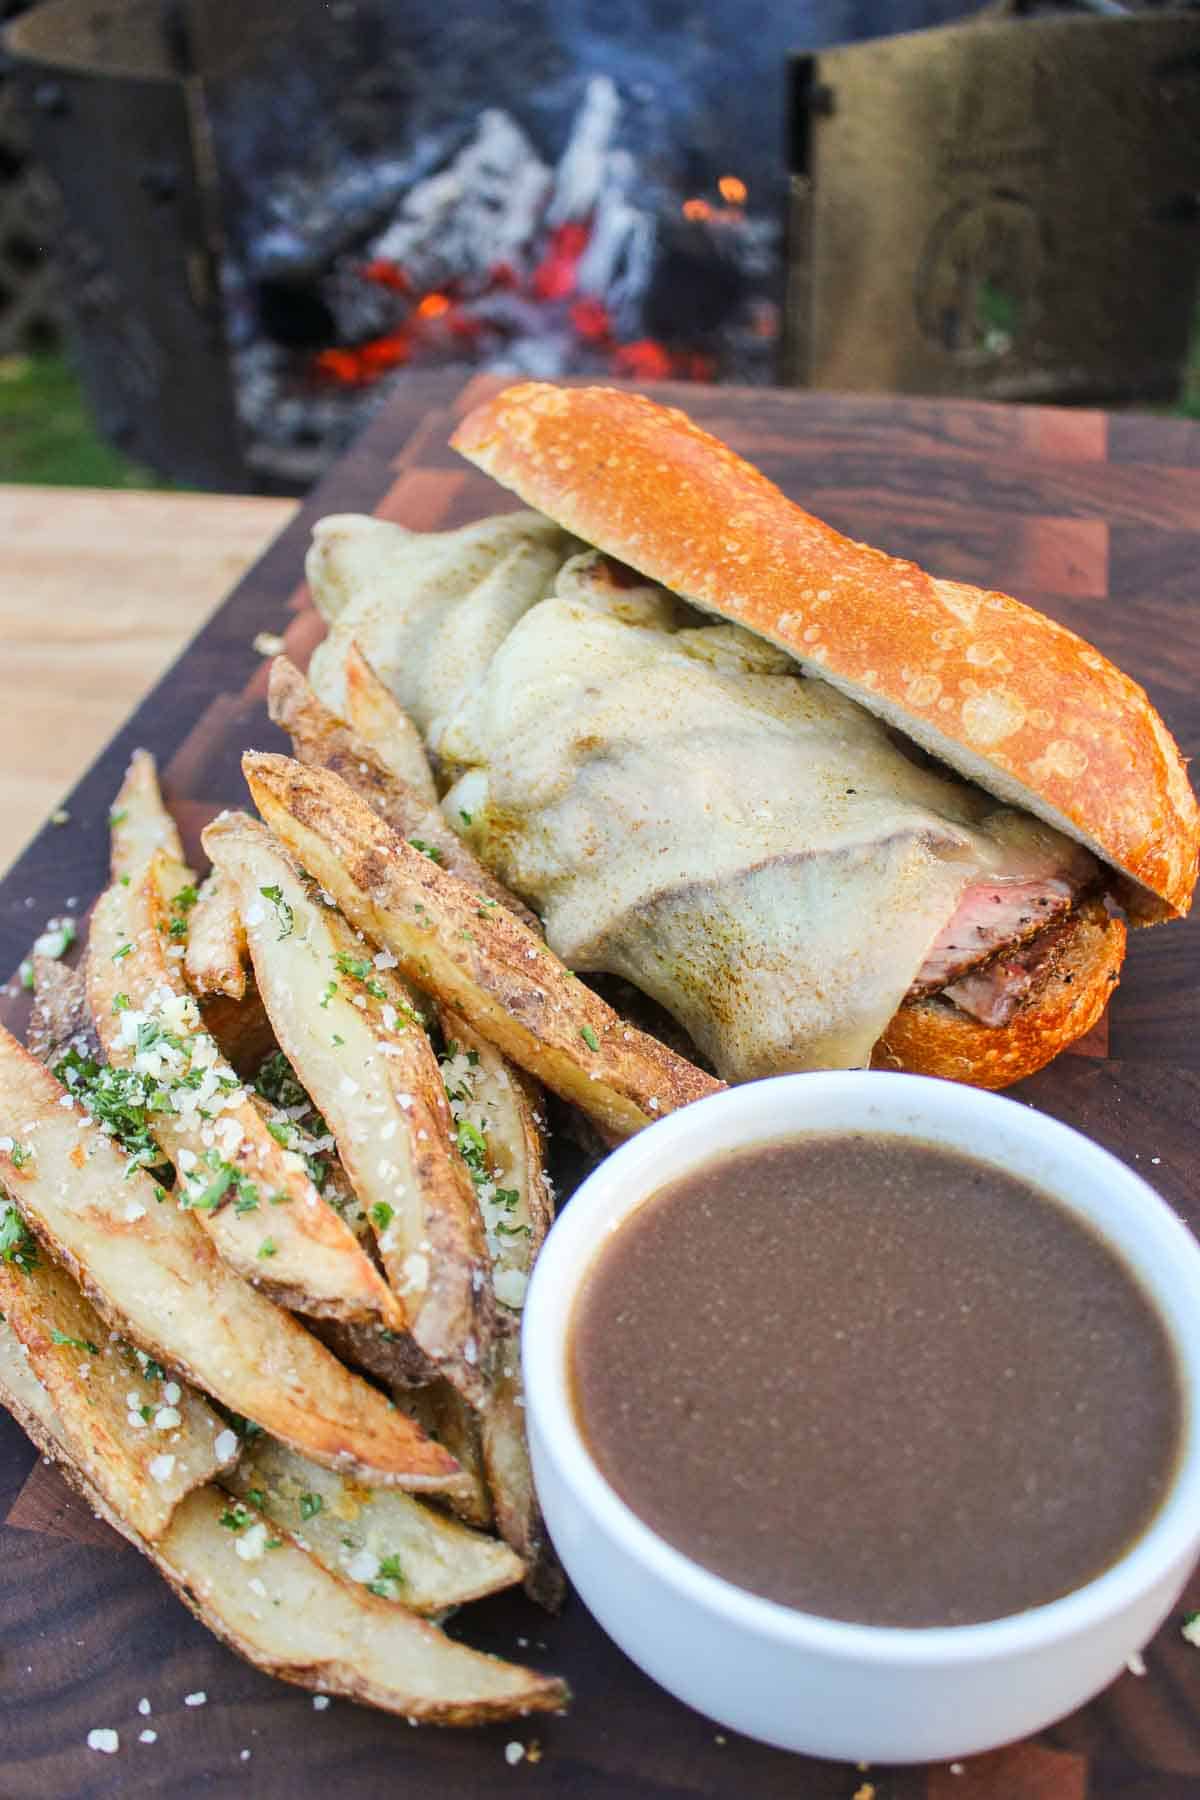 Grilled French Dip plated and served.